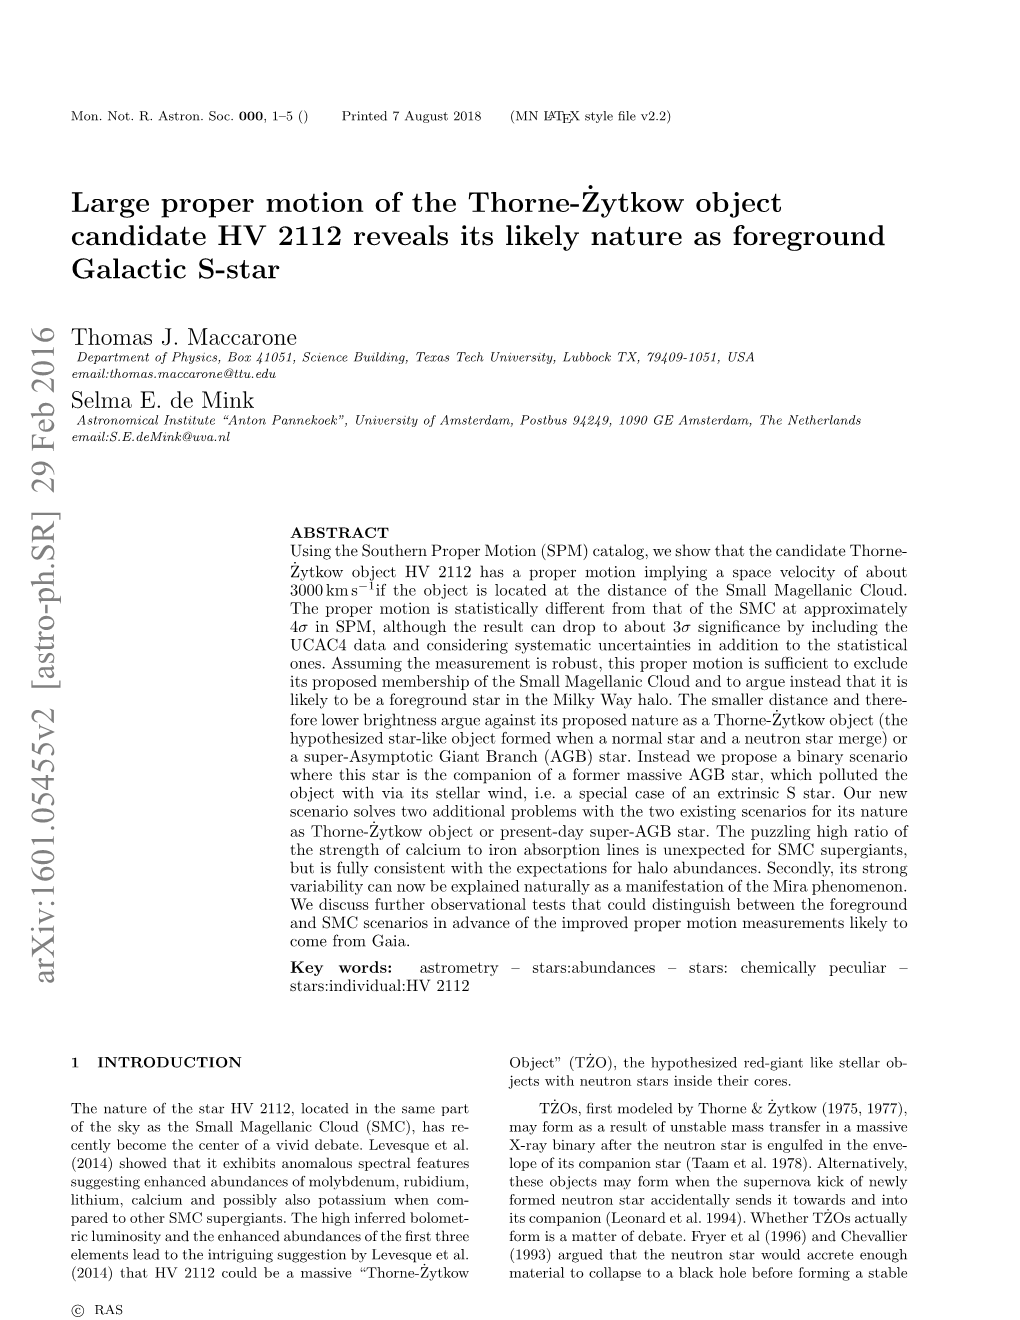 Large Proper Motion of the Thorne-˙Zytkow Object Candidate HV 2112